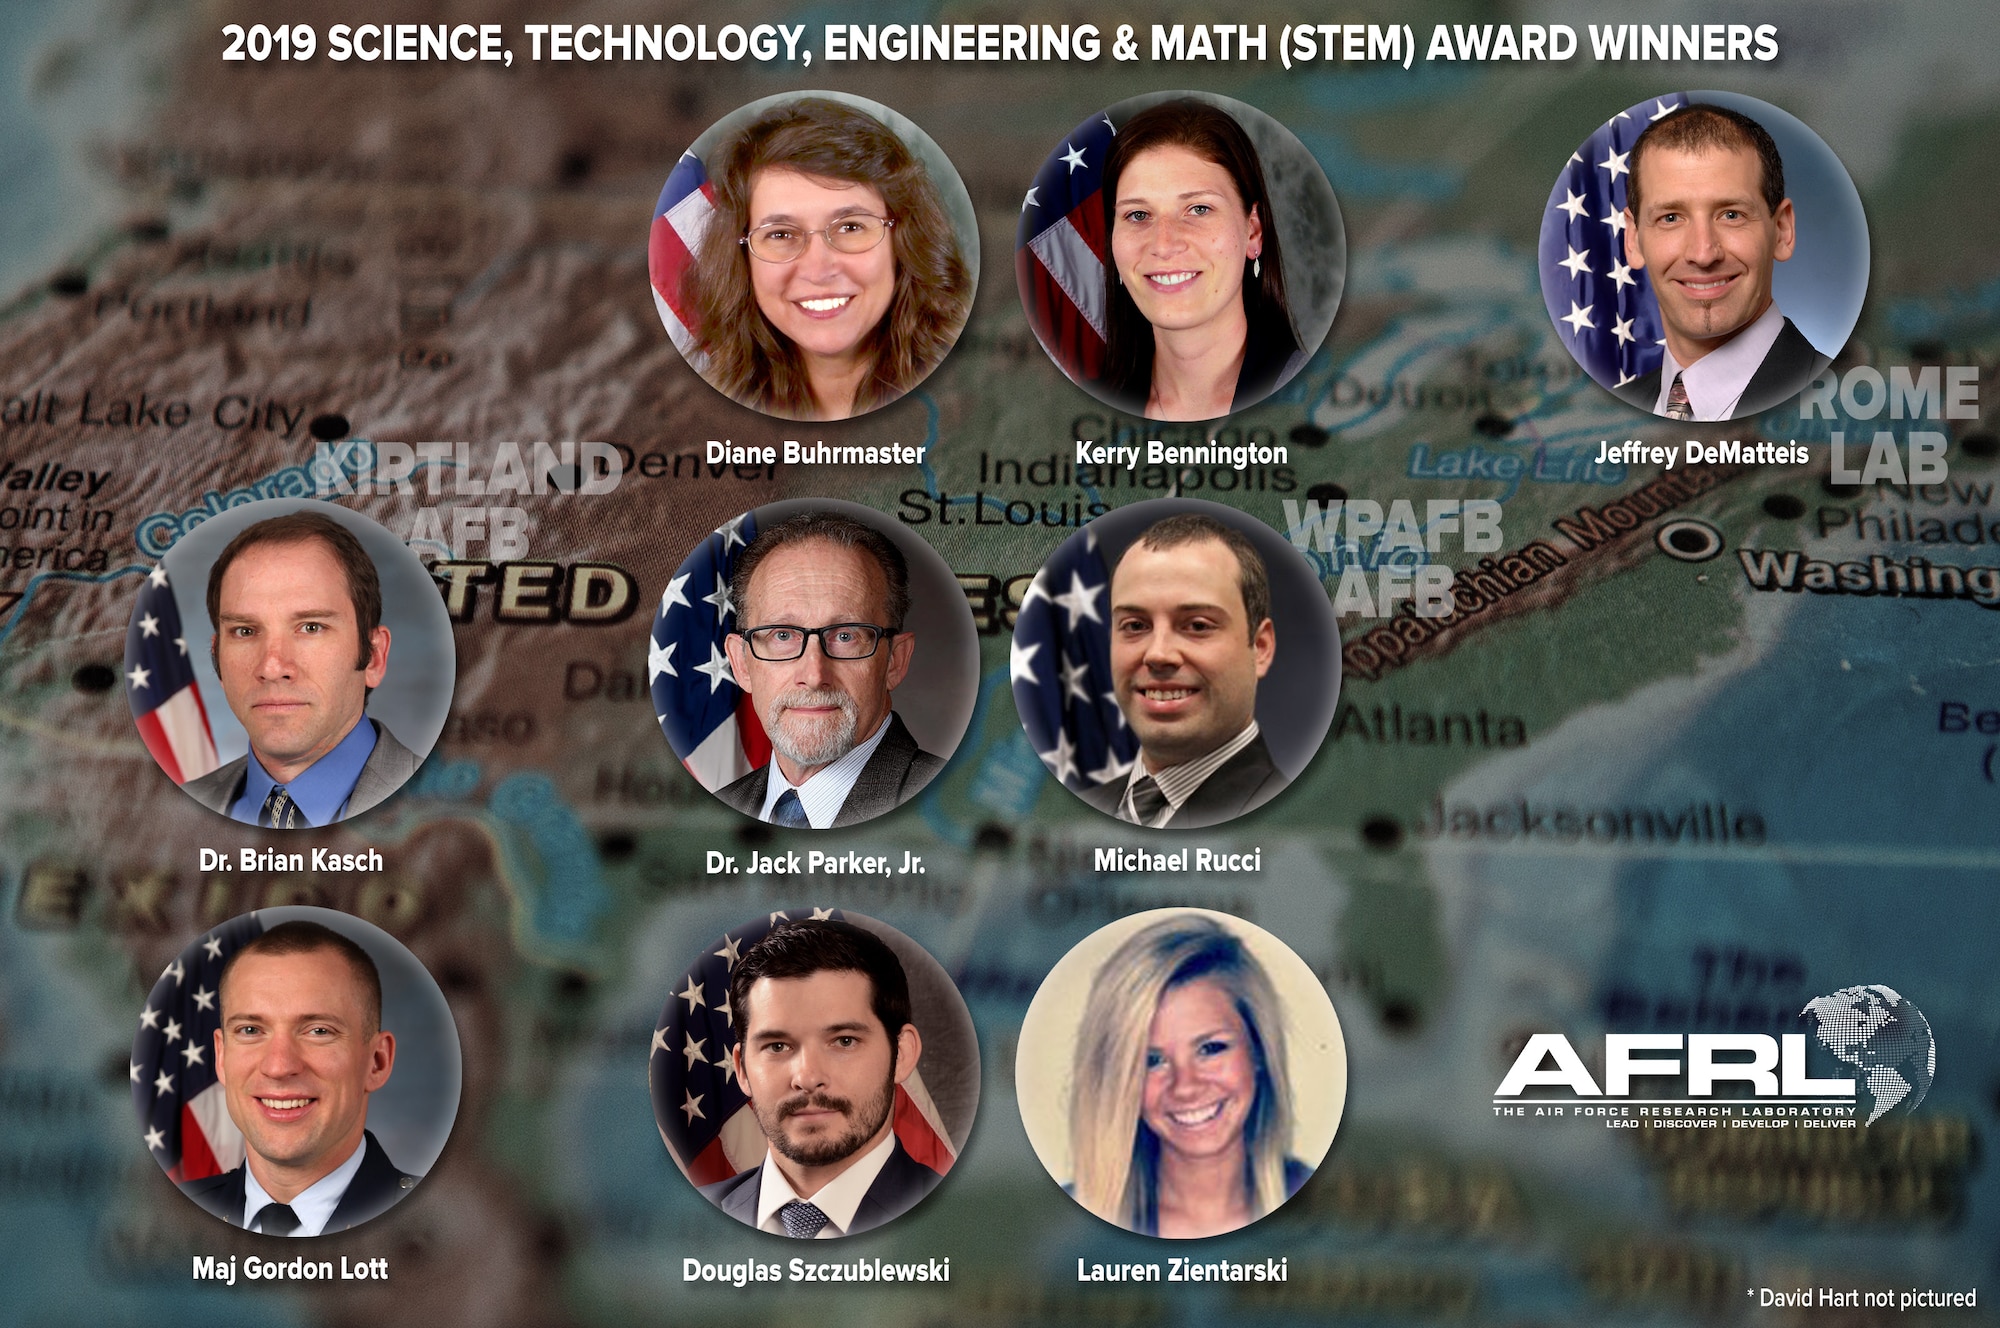 Ten scientists and engineers from the Air Force Research Laboratory earned accolades as winners of 2019 Science, Technology, Engineering and Math (STEM) Awards. This prestigious honor from the office of the Air Force Chief Scientist Dr. Richard Joseph and Acting Deputy Assistant Secretary Science, Technology and Engineering Yvette Weber recognizes Department of Defense civilians for their technical contributions, career achievements and superior dedication to the mission. (U.S. Air Force photo illustration/Patrick Londergan)